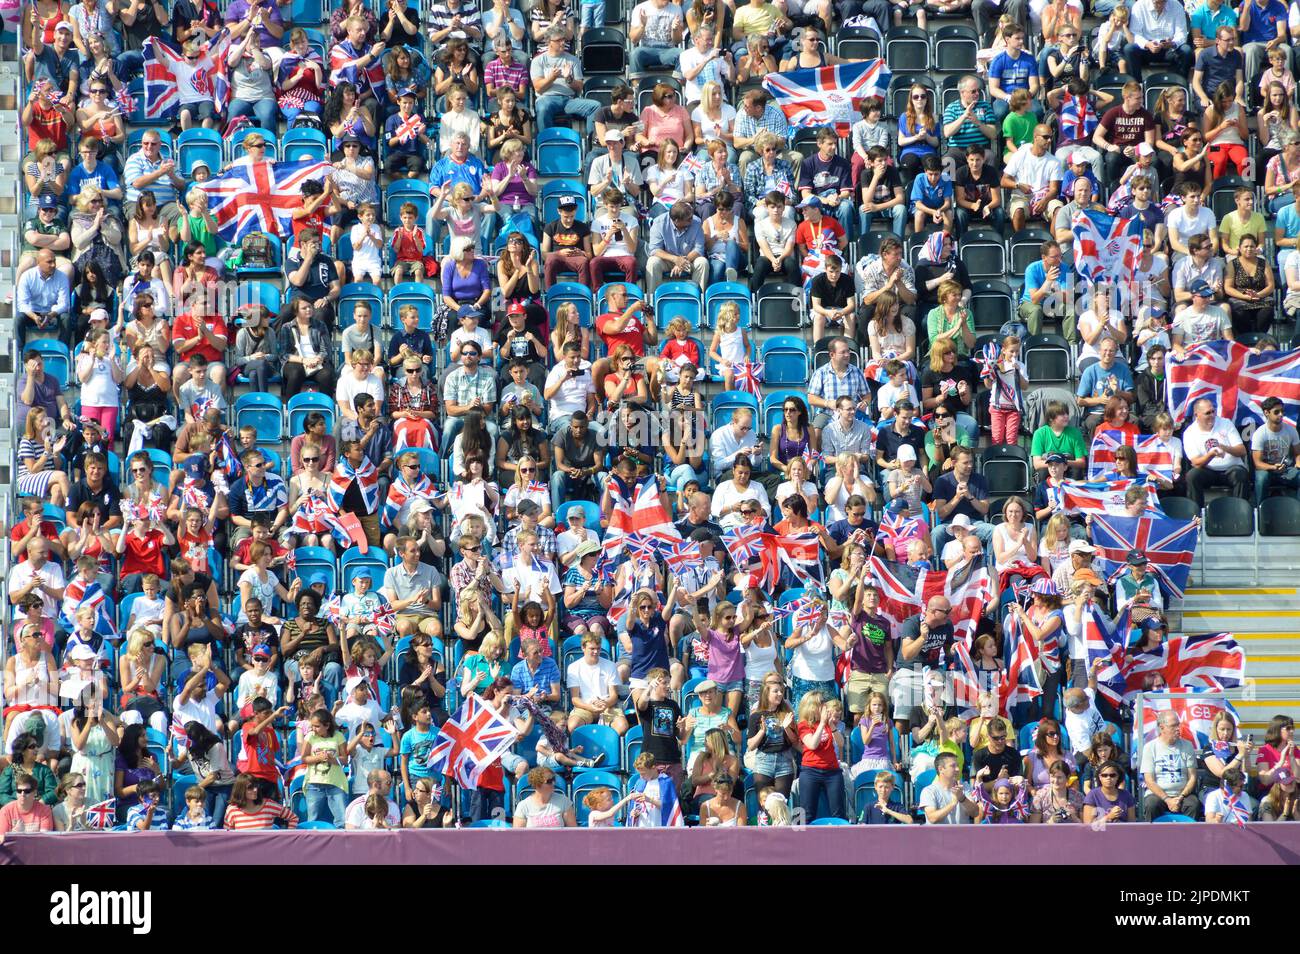 Adults children and families at London 2012 Paralympic games spectators seated in temporary stands to watch football event hot summer day England UK Stock Photo